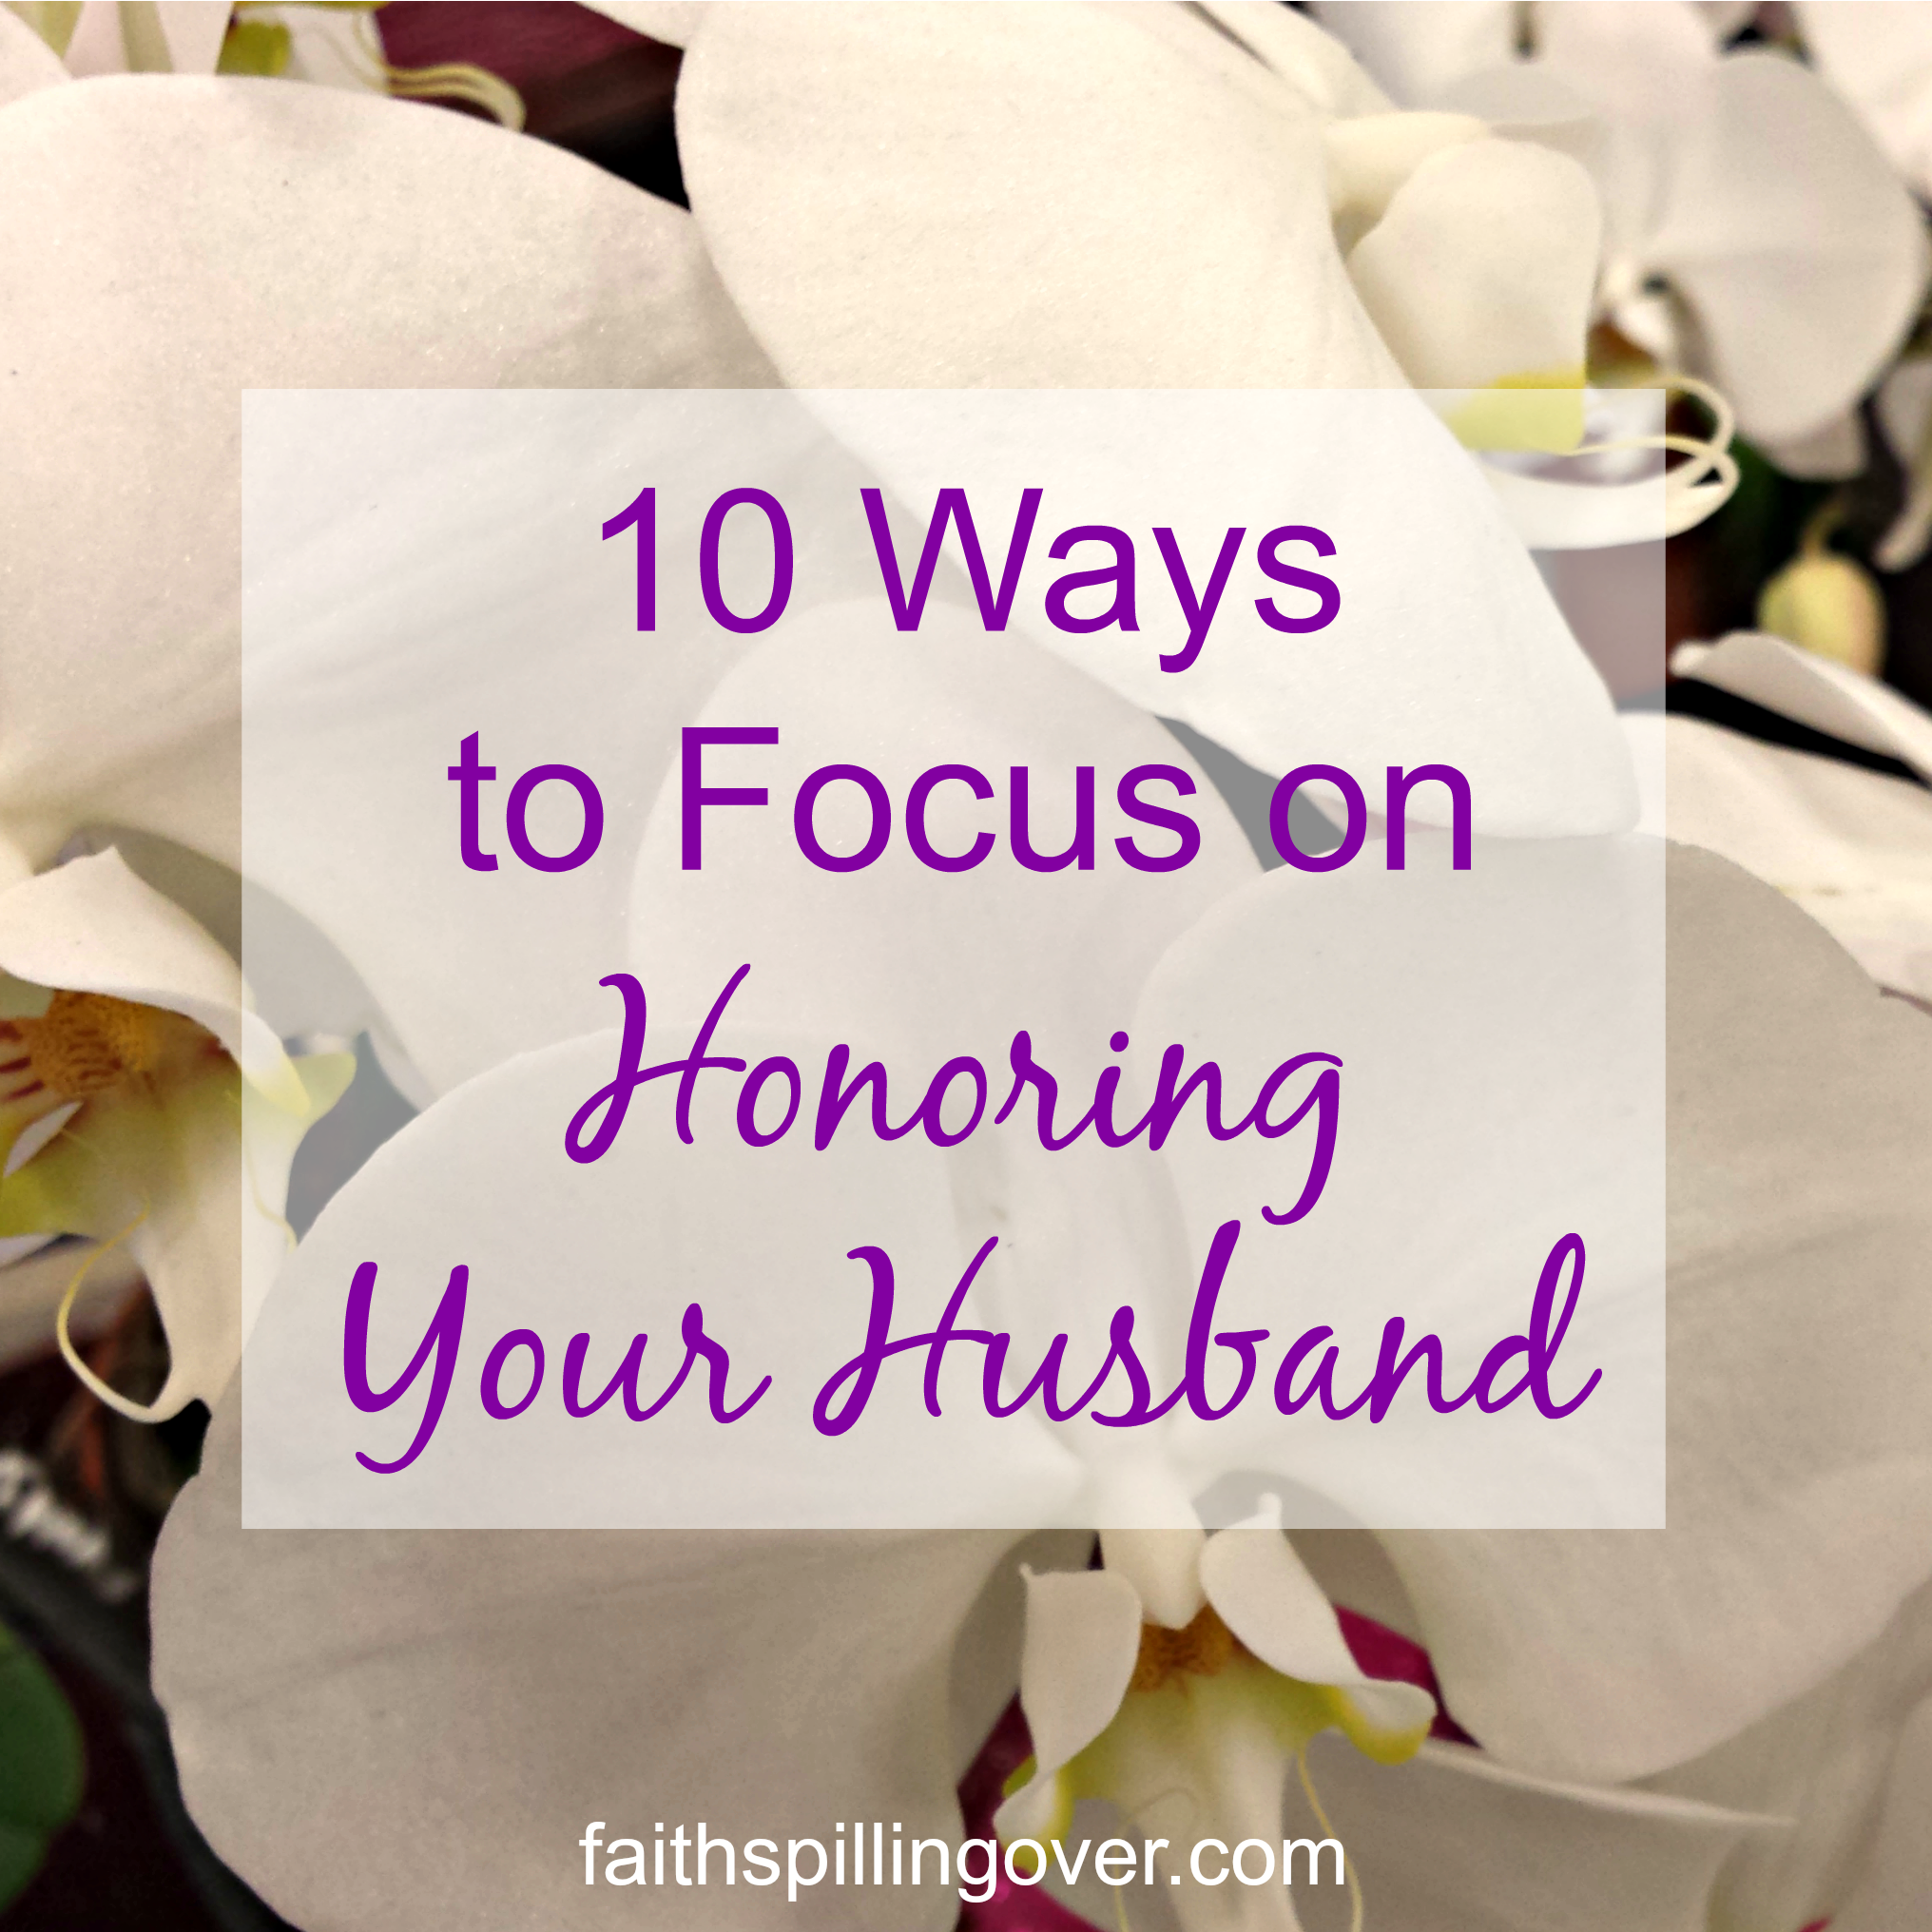 As we take our focus off of ourselves in order to do a better job of honoring our husbands, we reap the rewards of a better relationship.